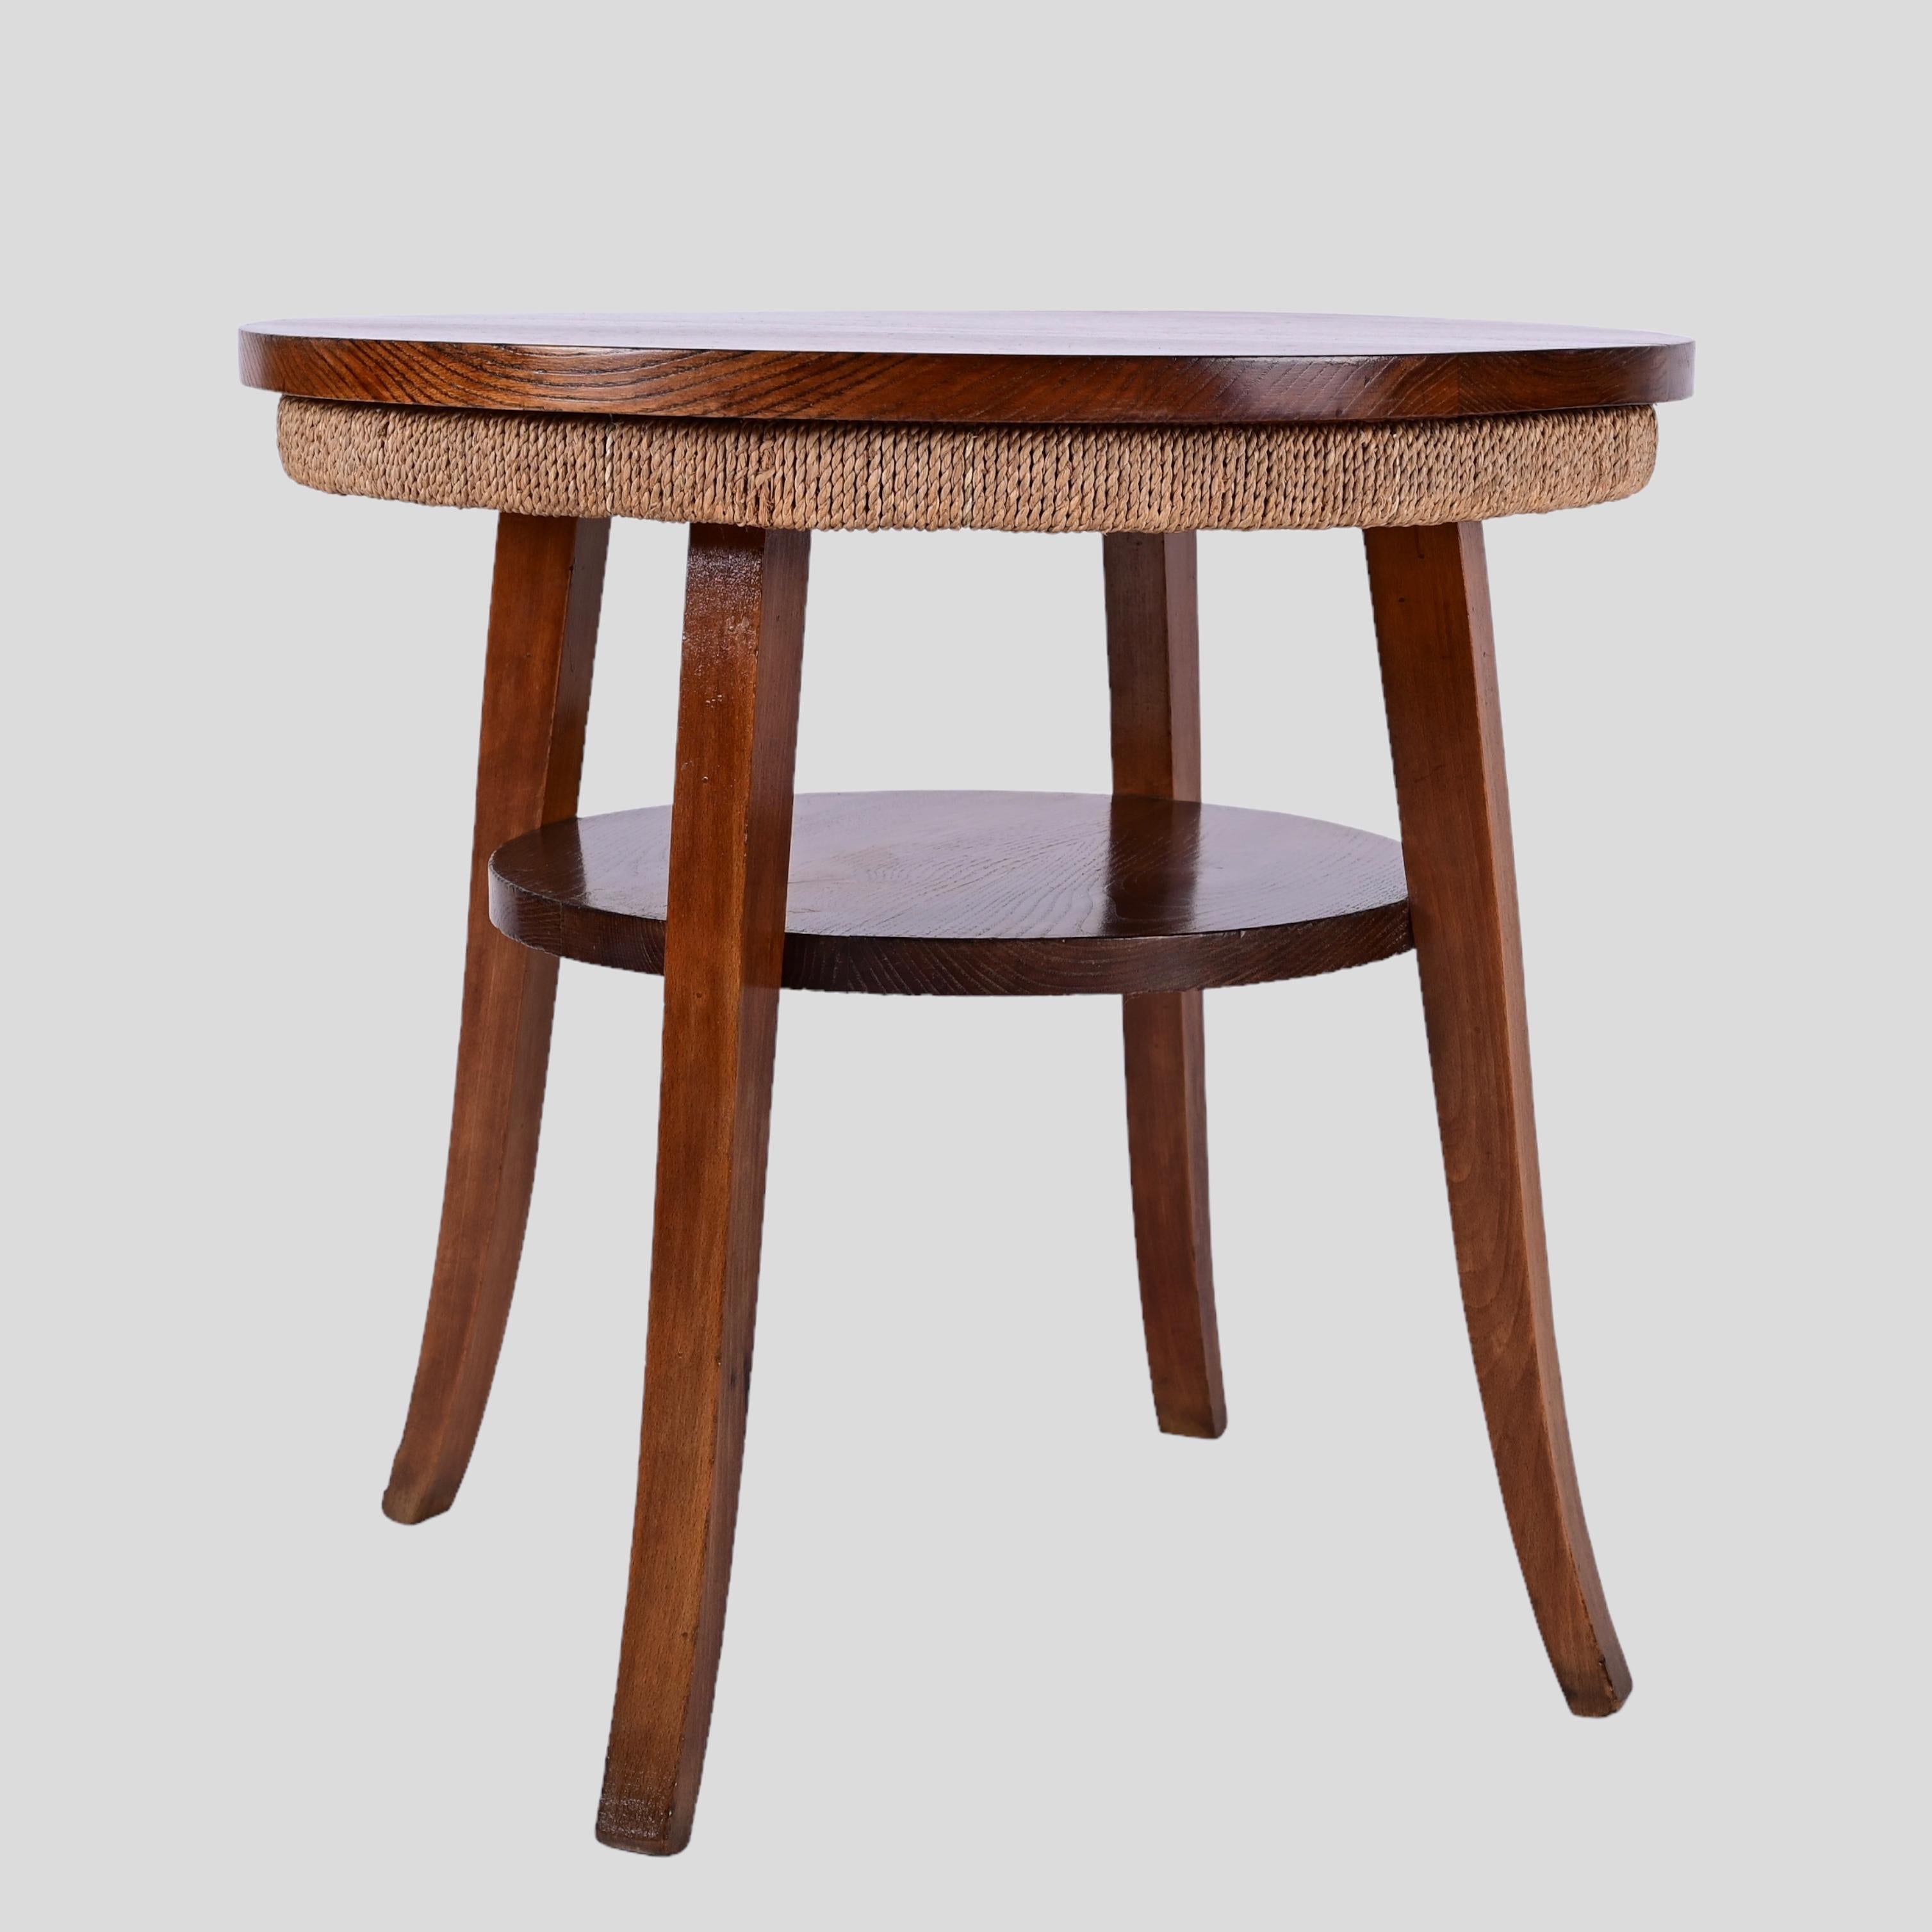 English Midcentury Two-Tier Round Rope and Chestnut Wood Italian Coffee Table, 1950s For Sale